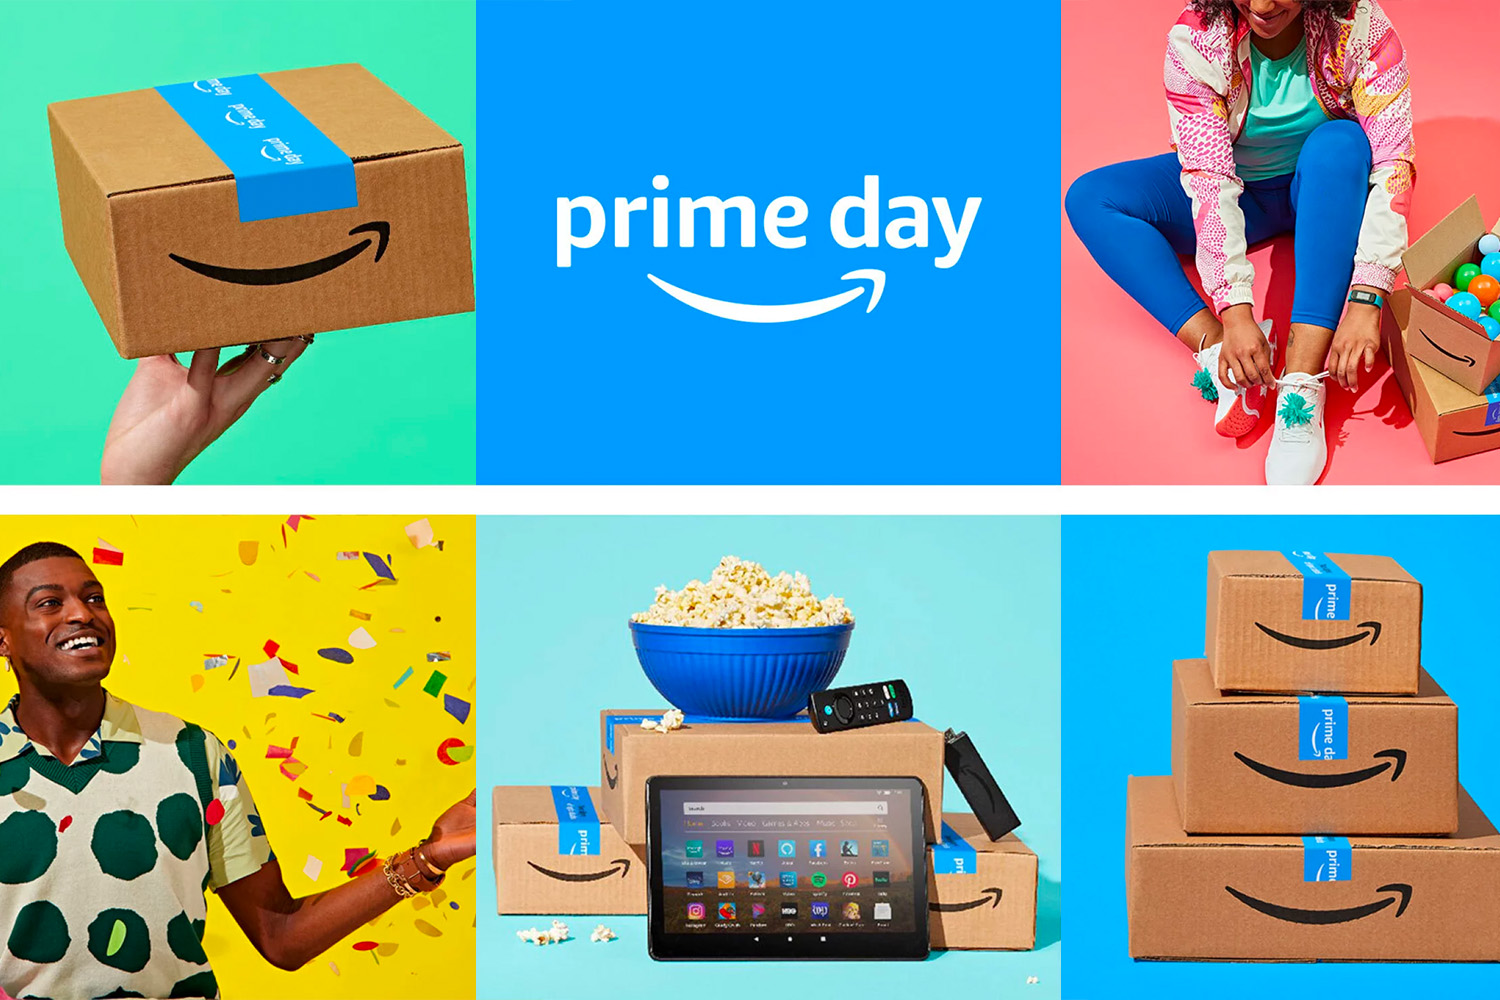 puts its own devices on sale early for Prime Day